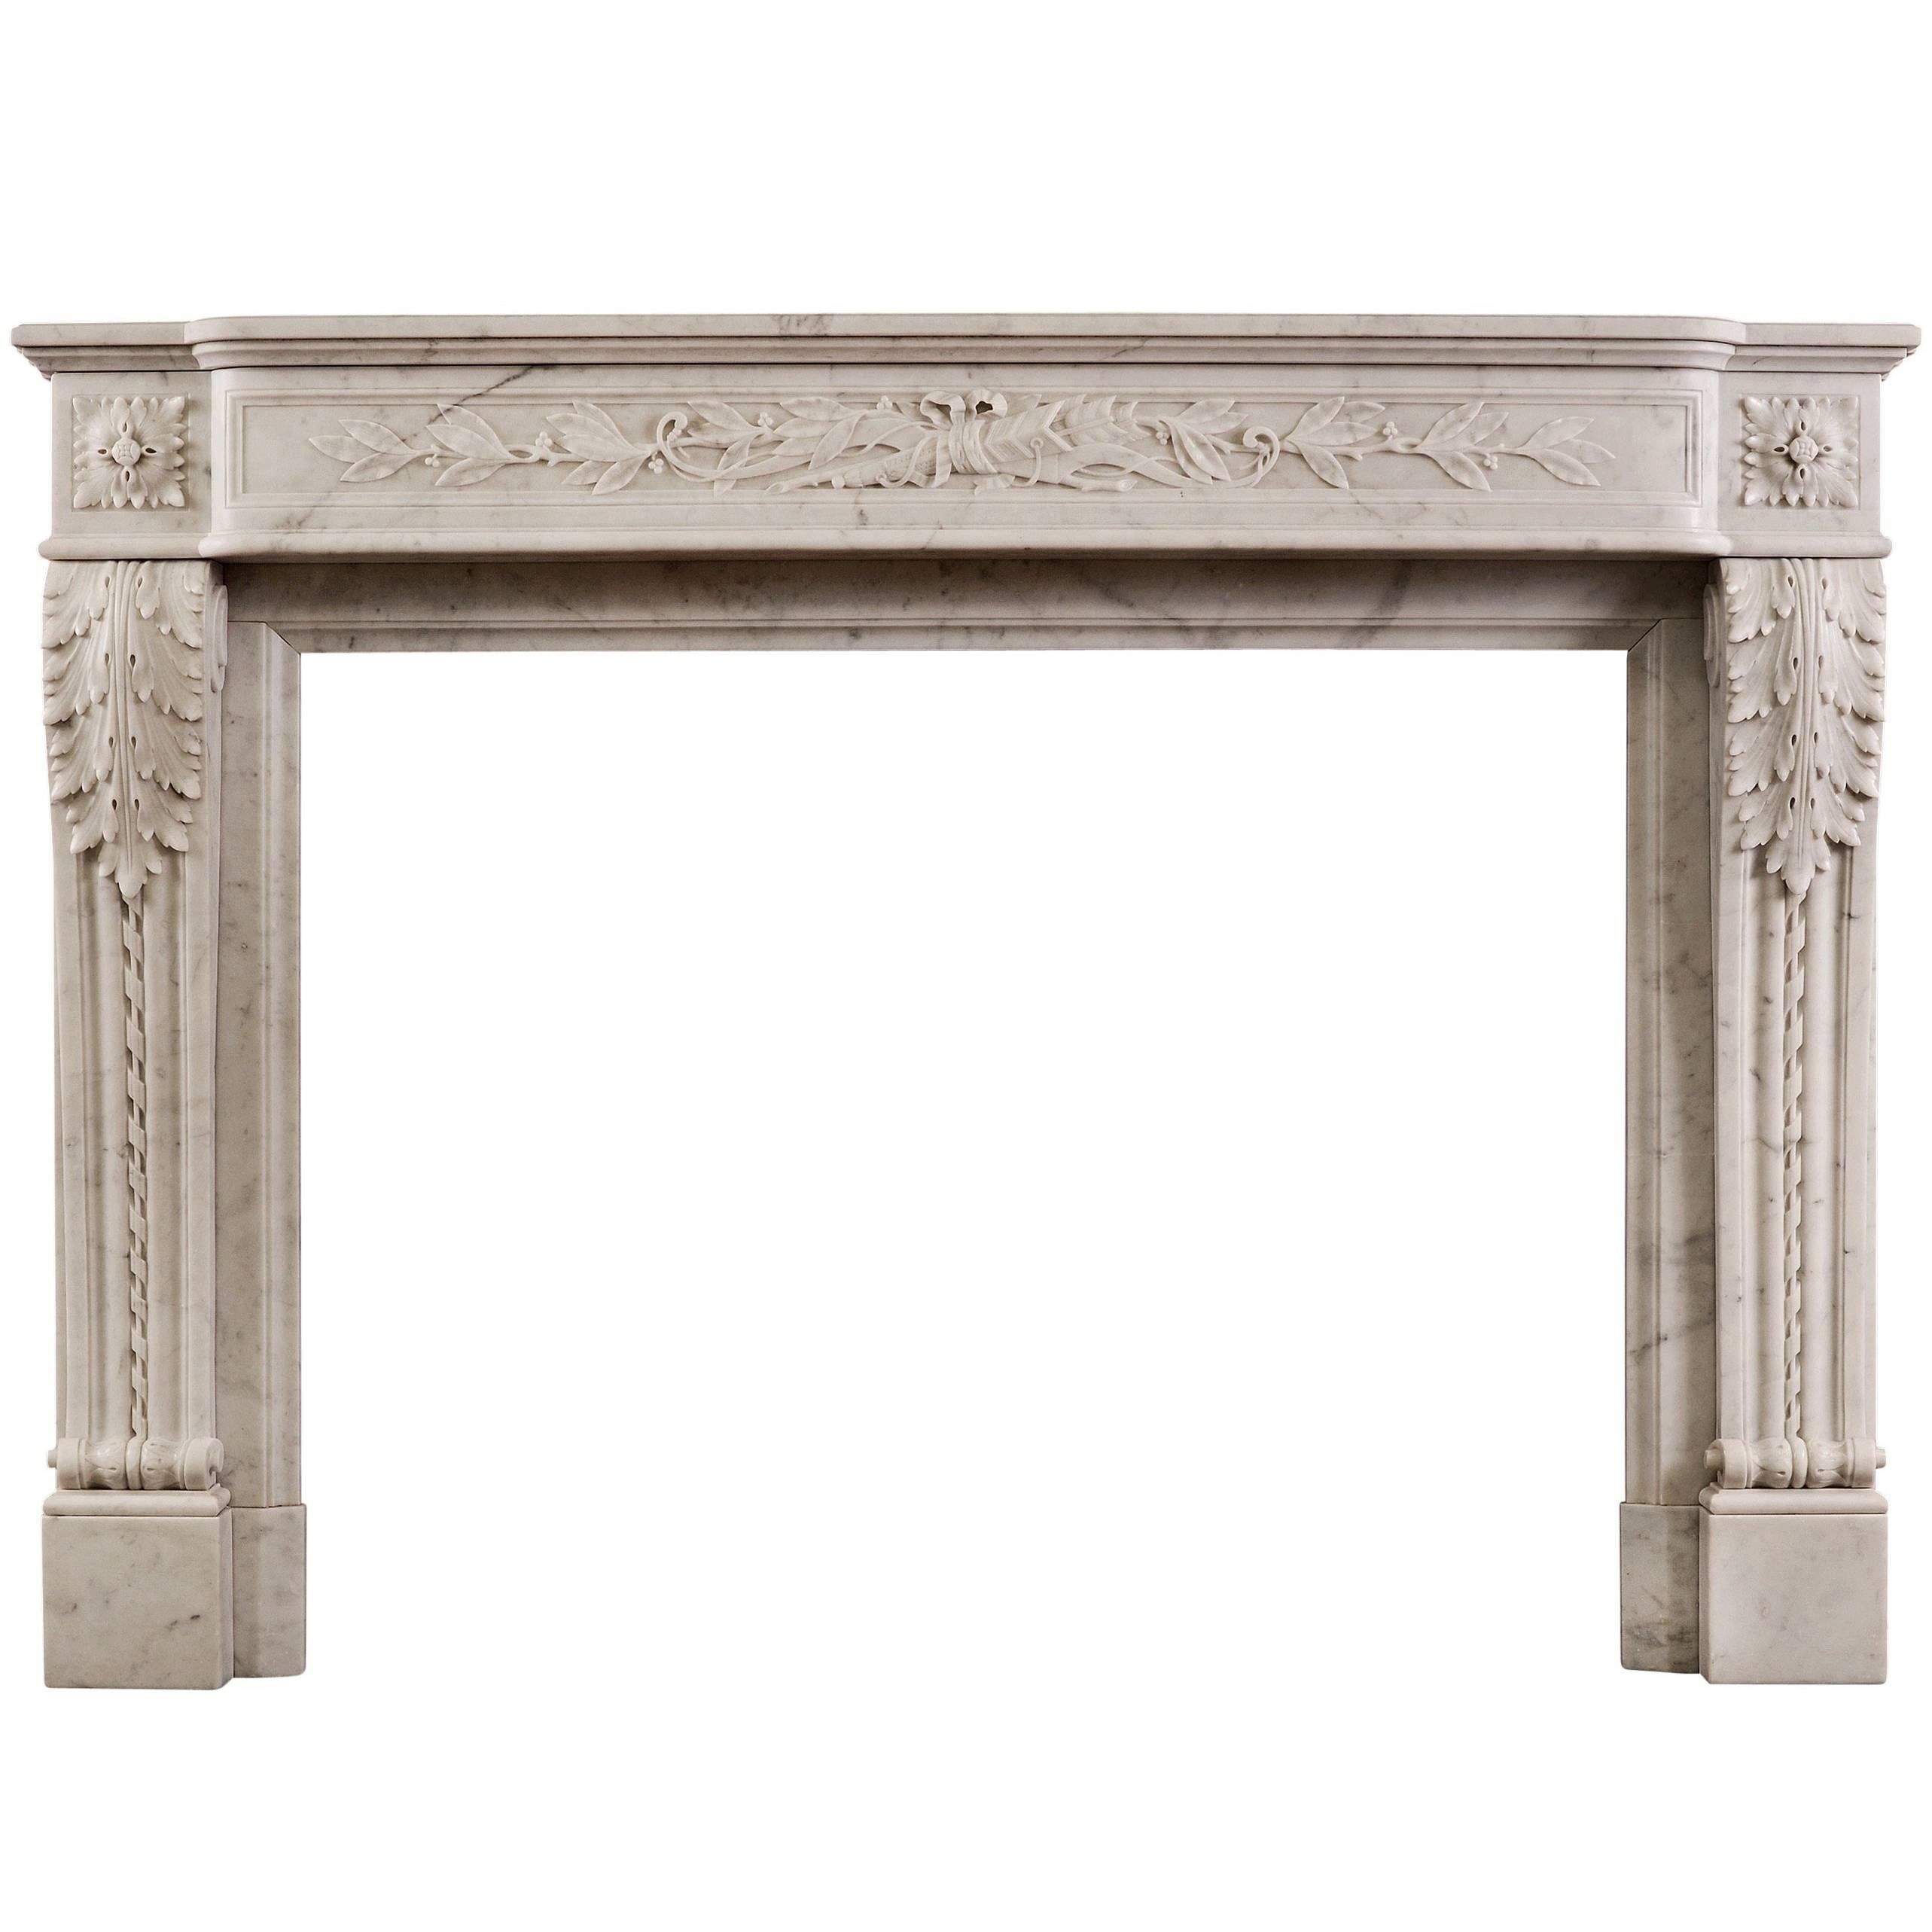 19th Century French Louis XVI Style Fireplace